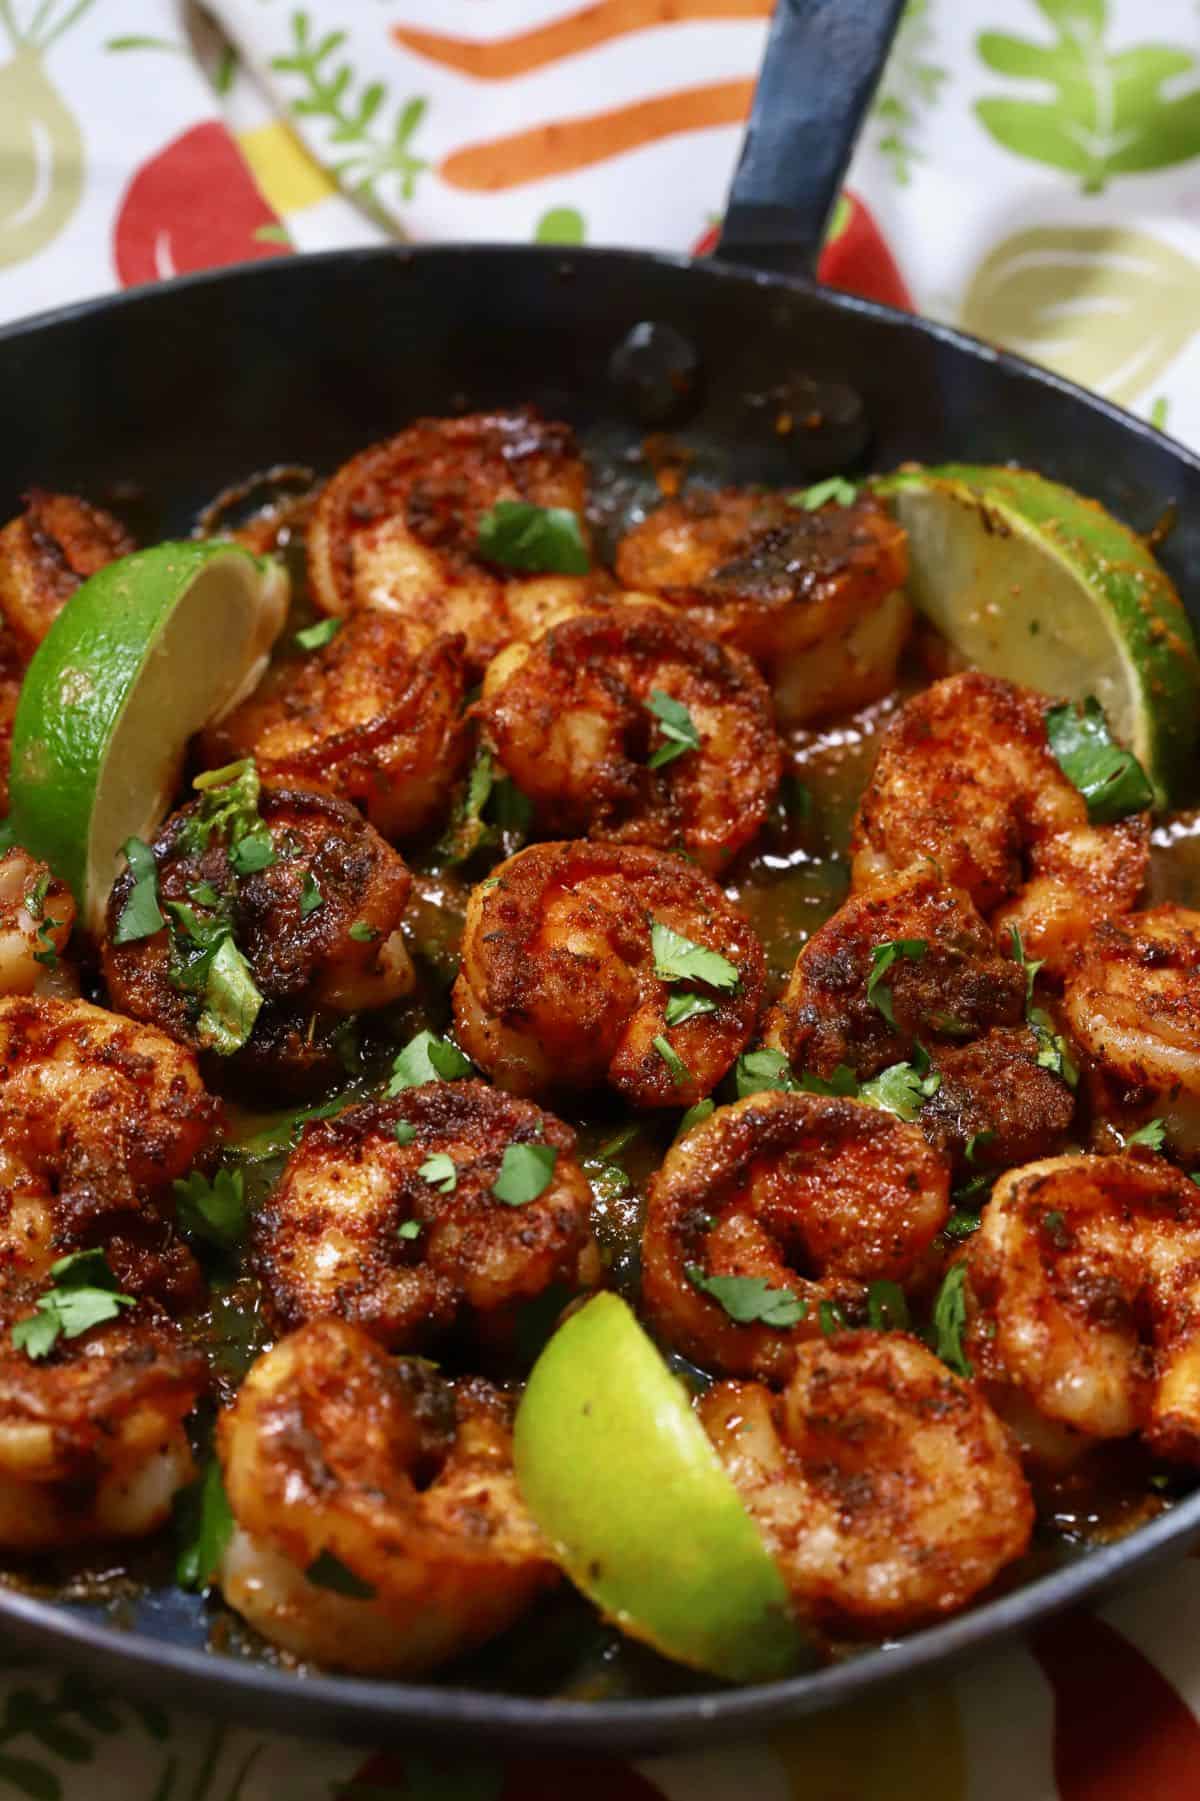 Lime slices, along with cooked shrimp in a skillet.